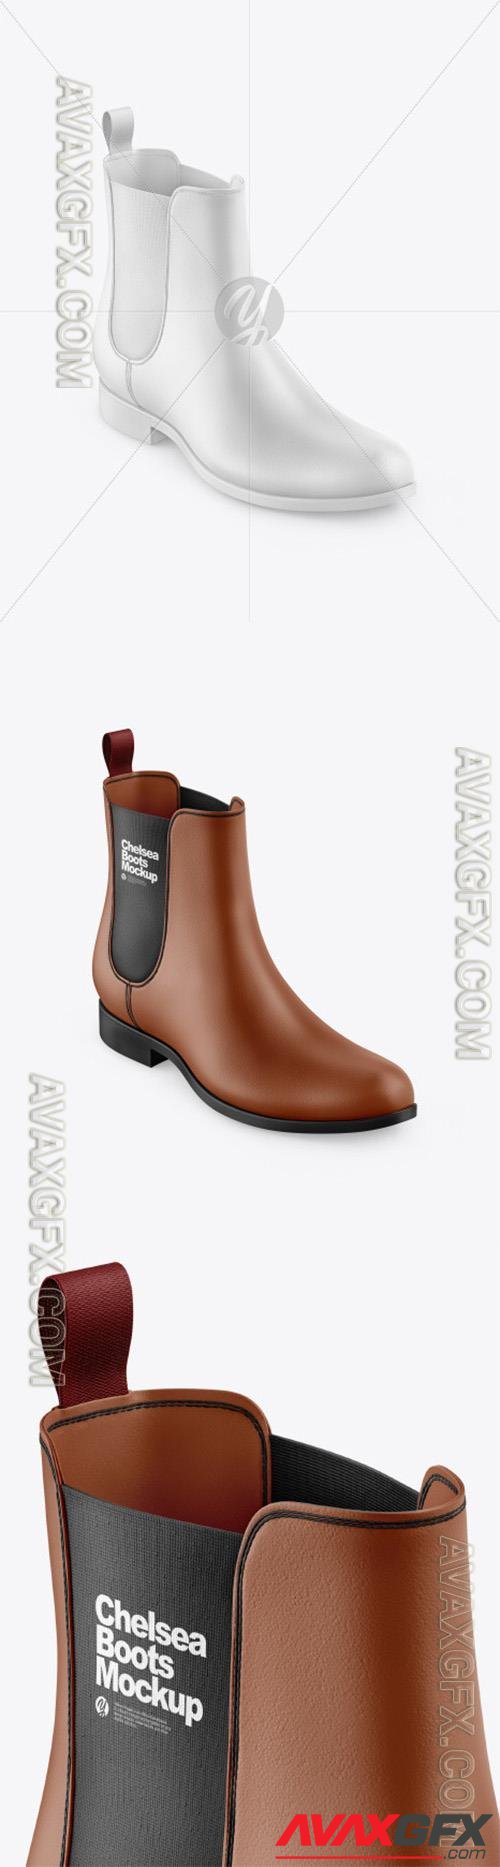 Matte Leather Chelsea Boot Mockup 73718